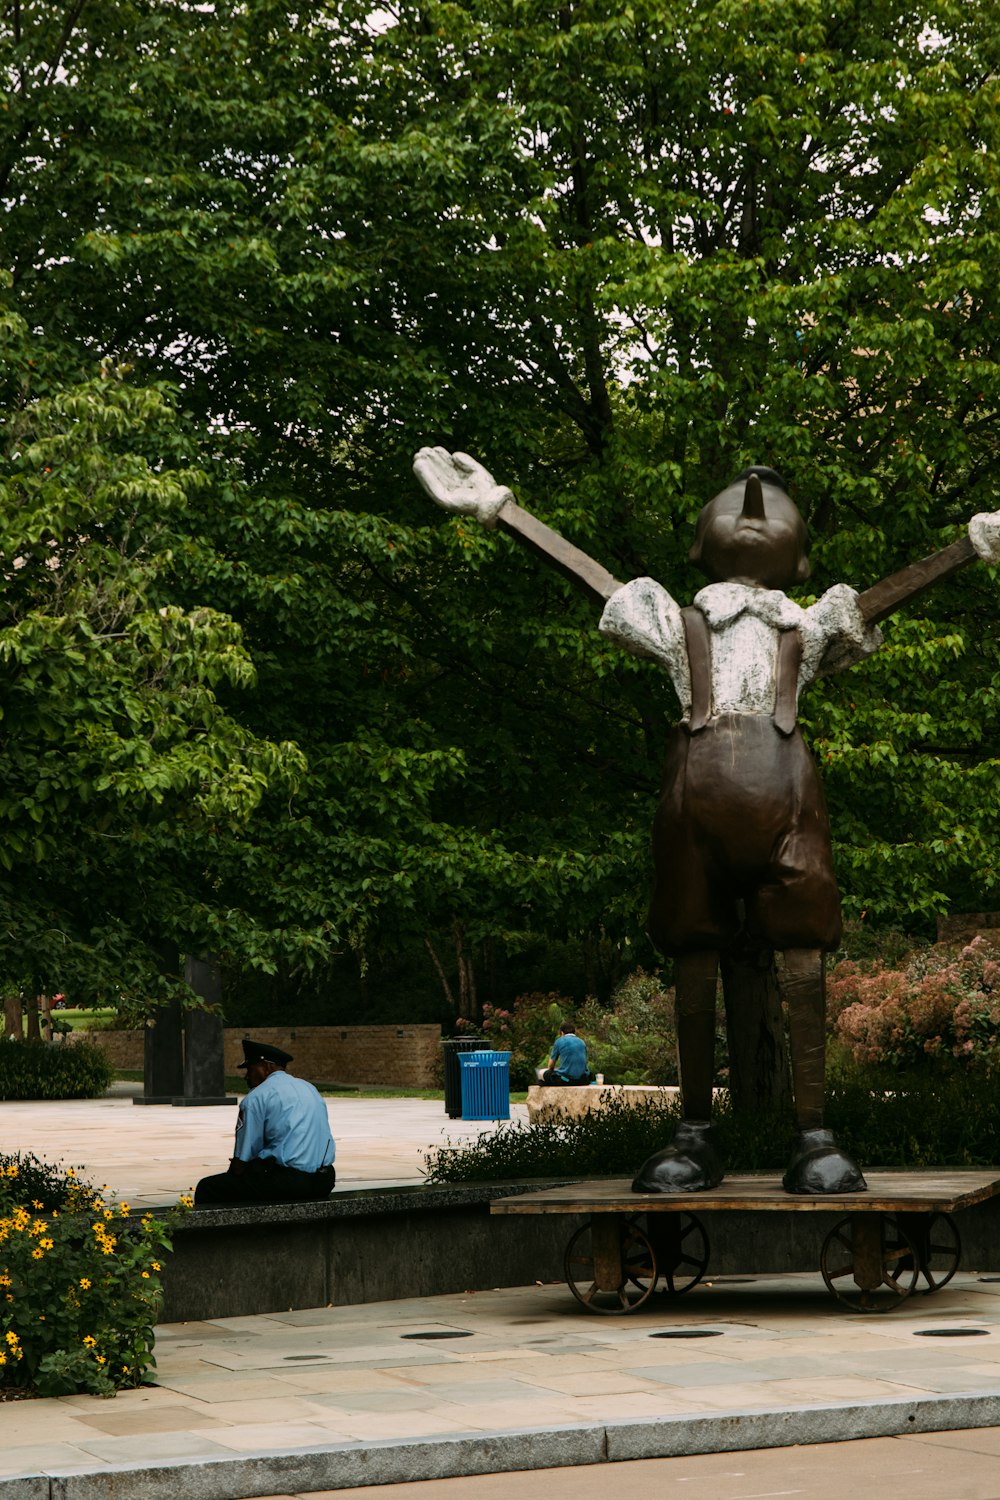 a statue of a person with arms outstretched